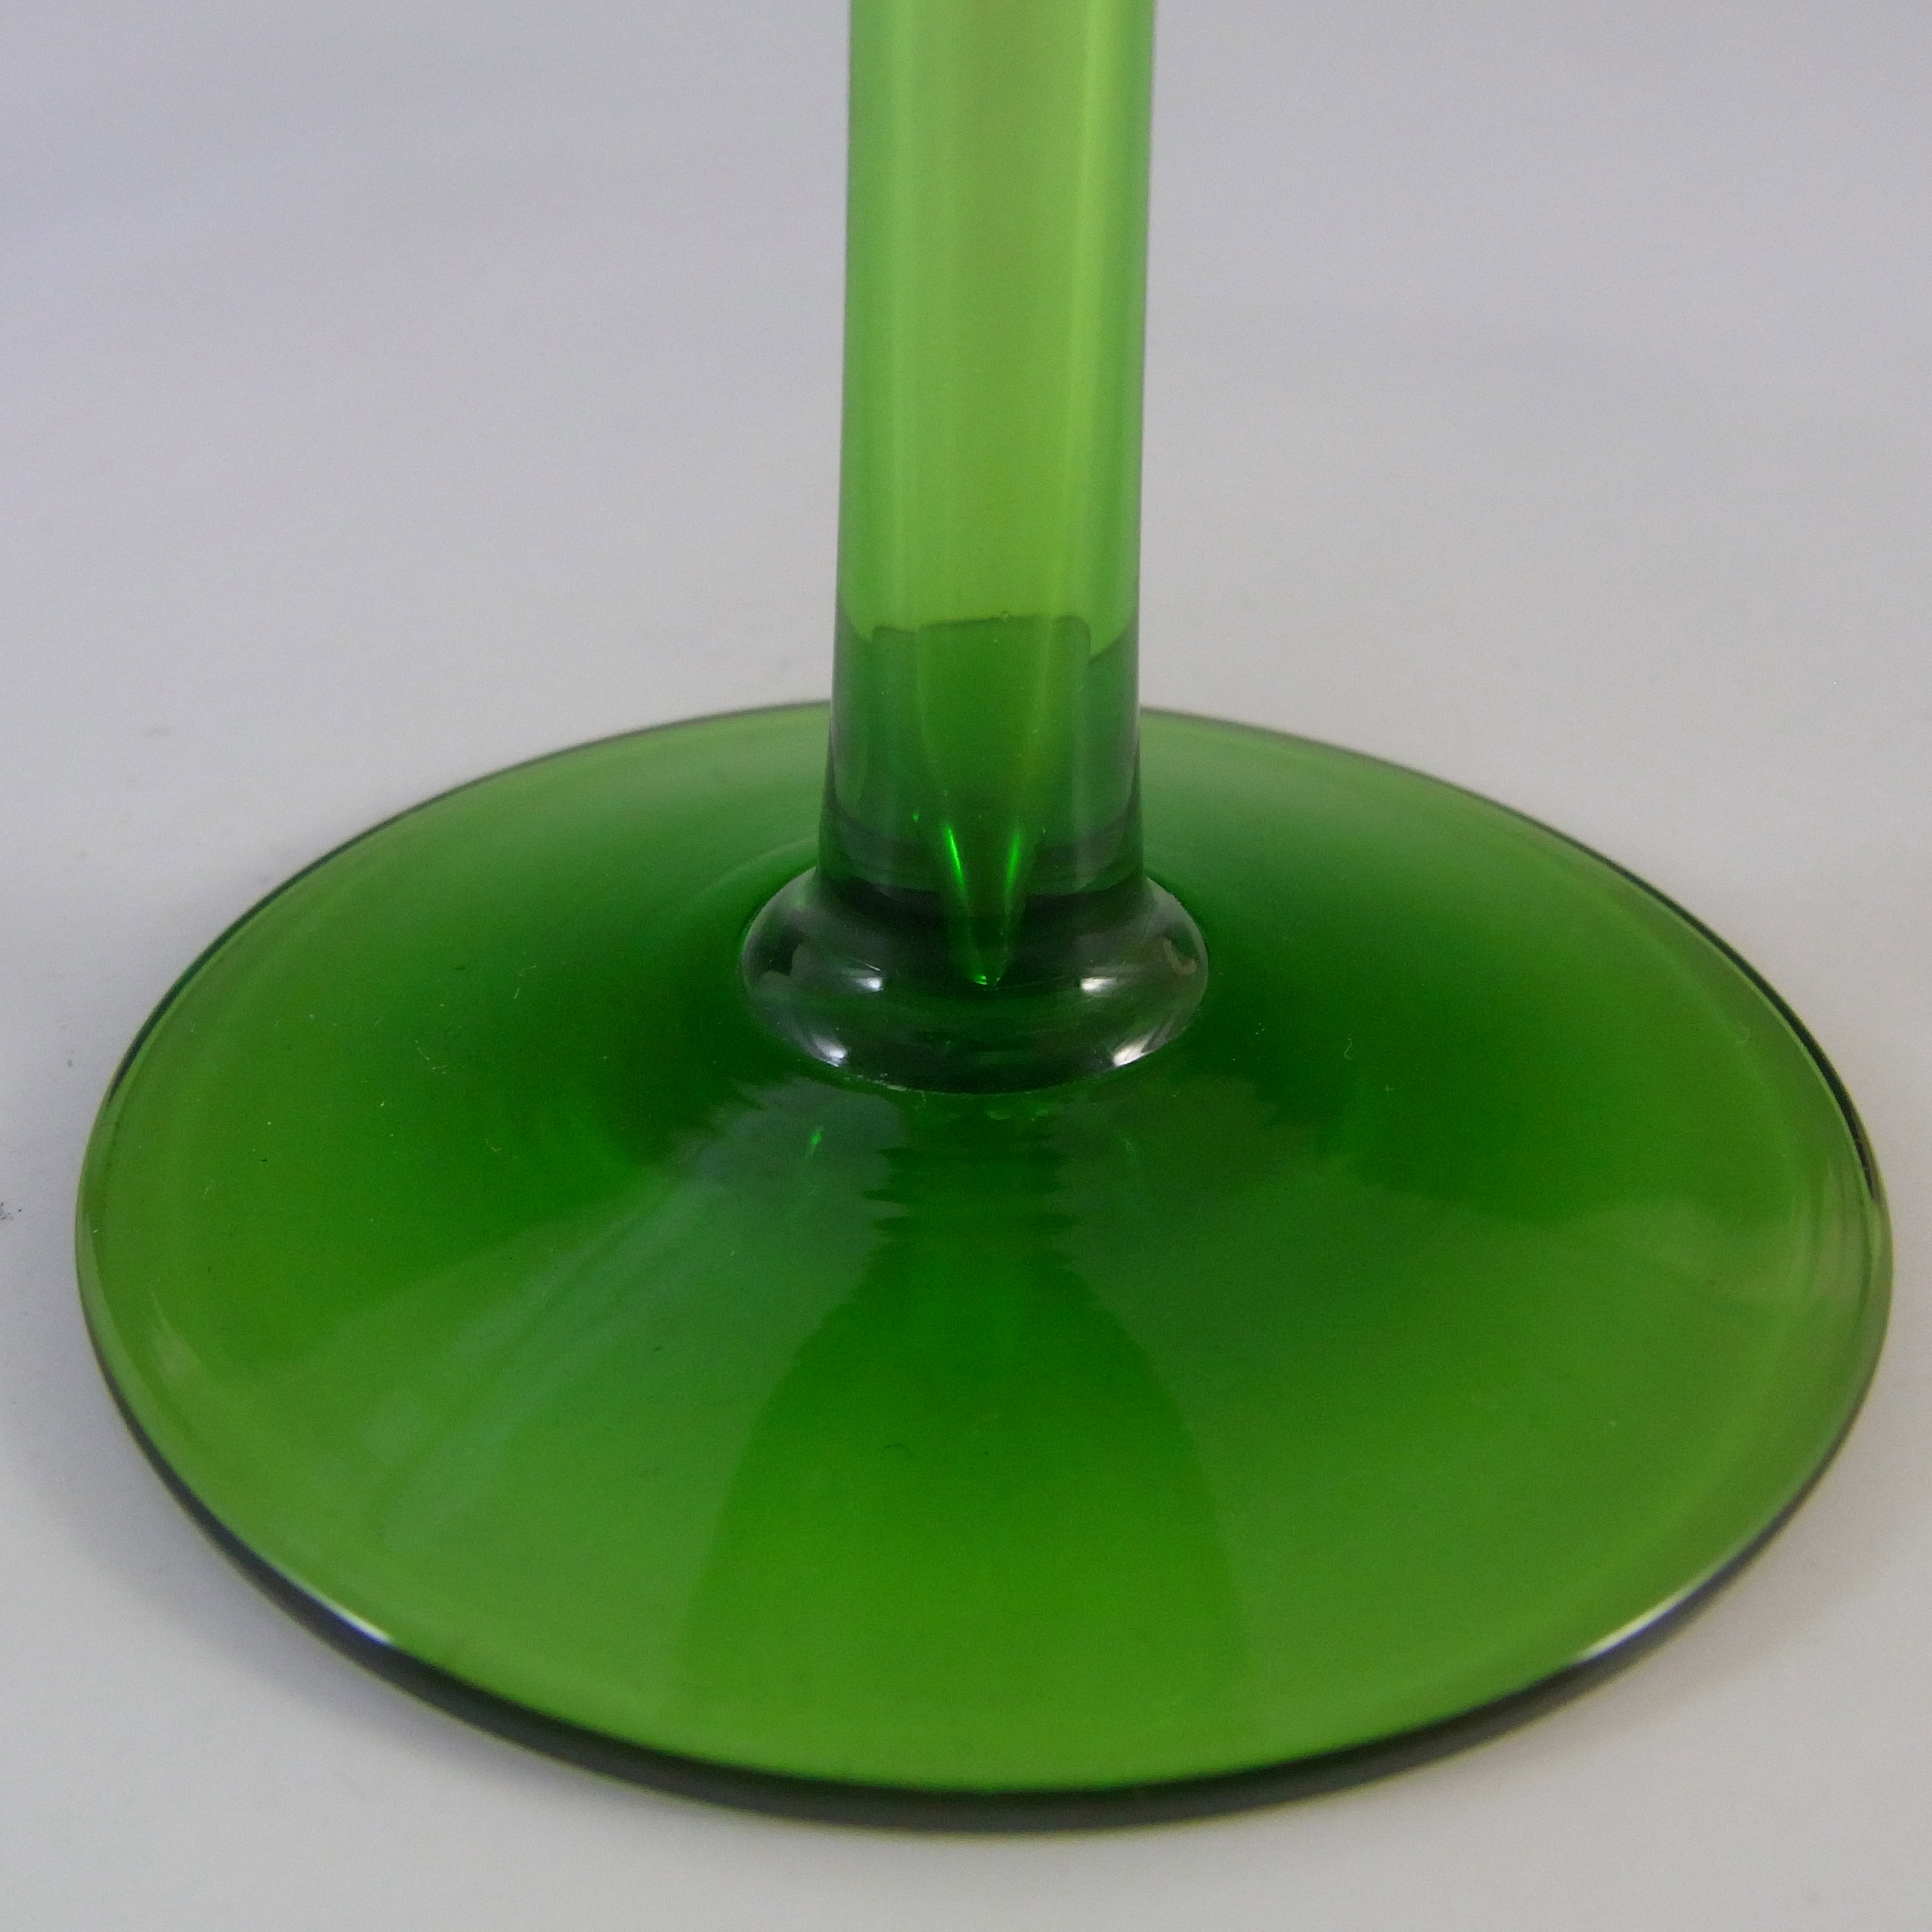 Wedgwood "Brancaster" Green Glass 5.25" Candlestick RSW15/1 - Marked - Click Image to Close